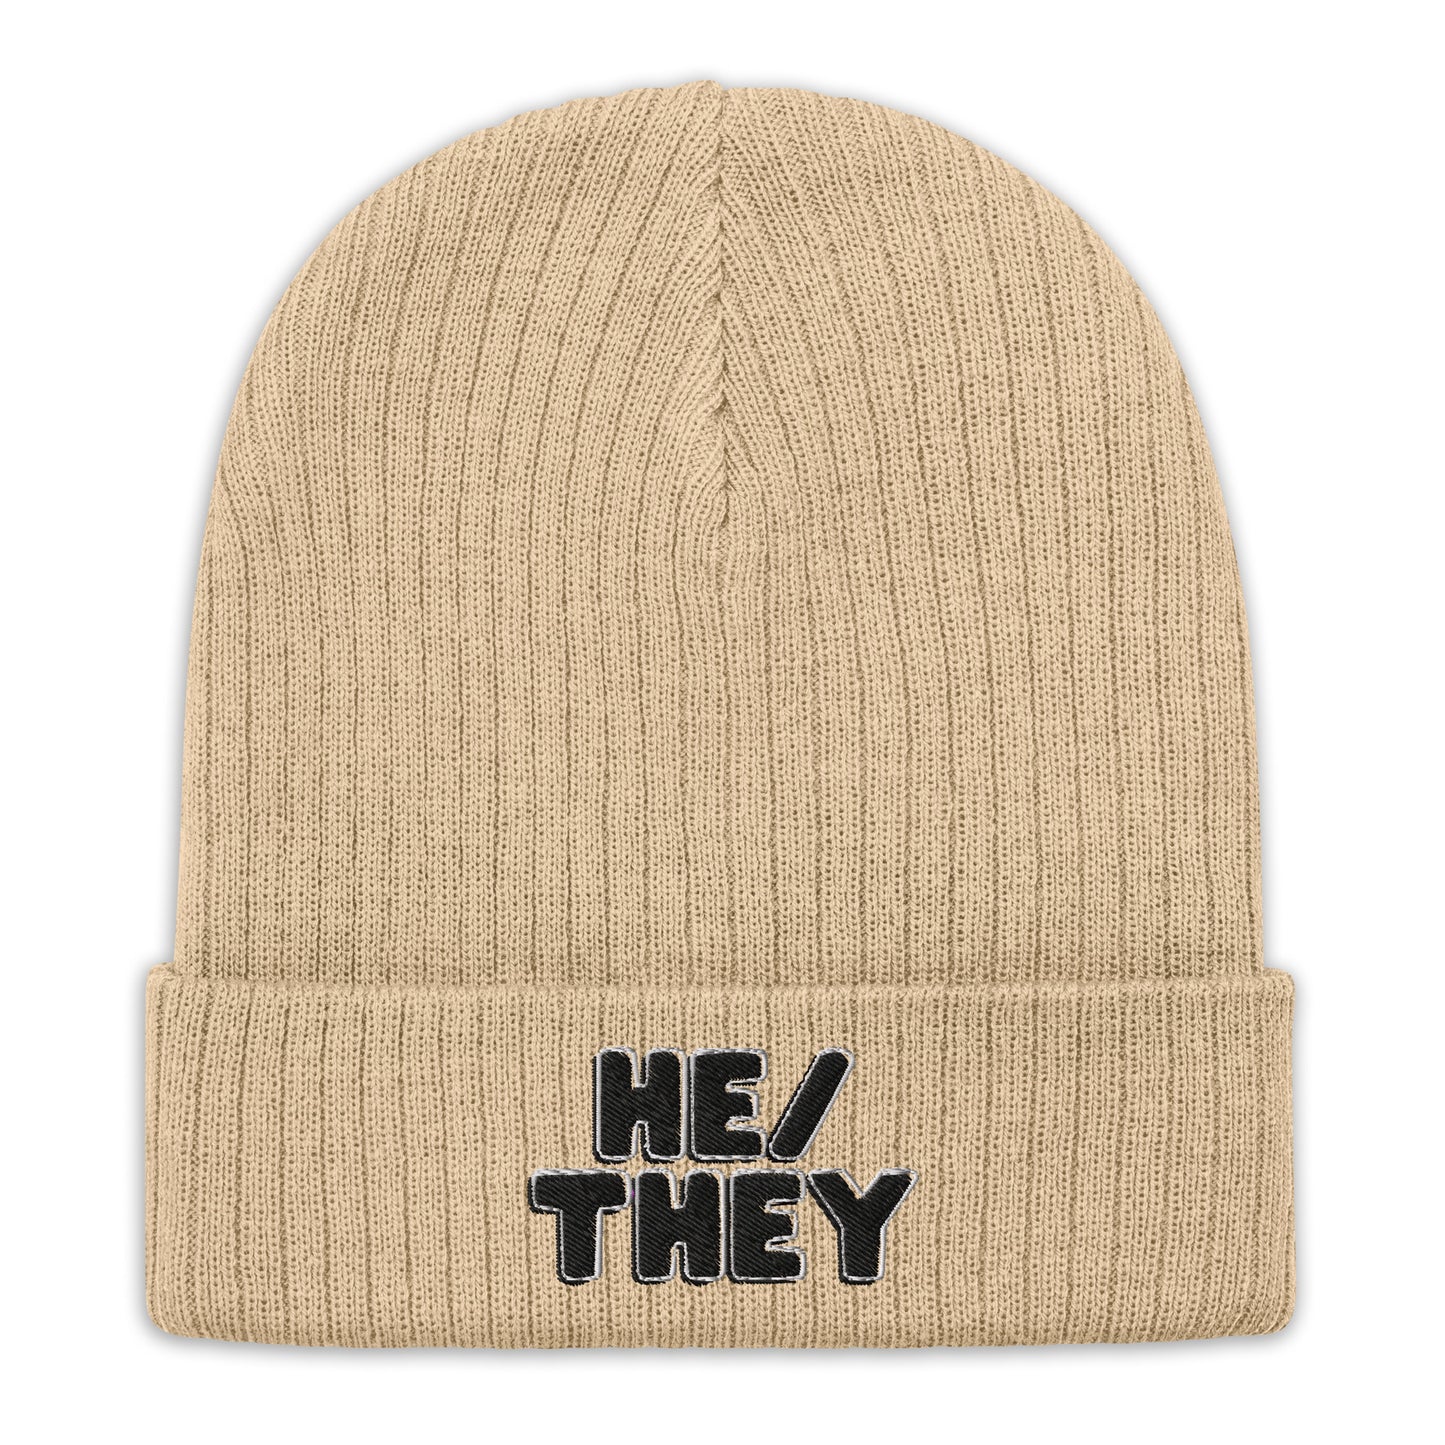 He/They Knit Beanie